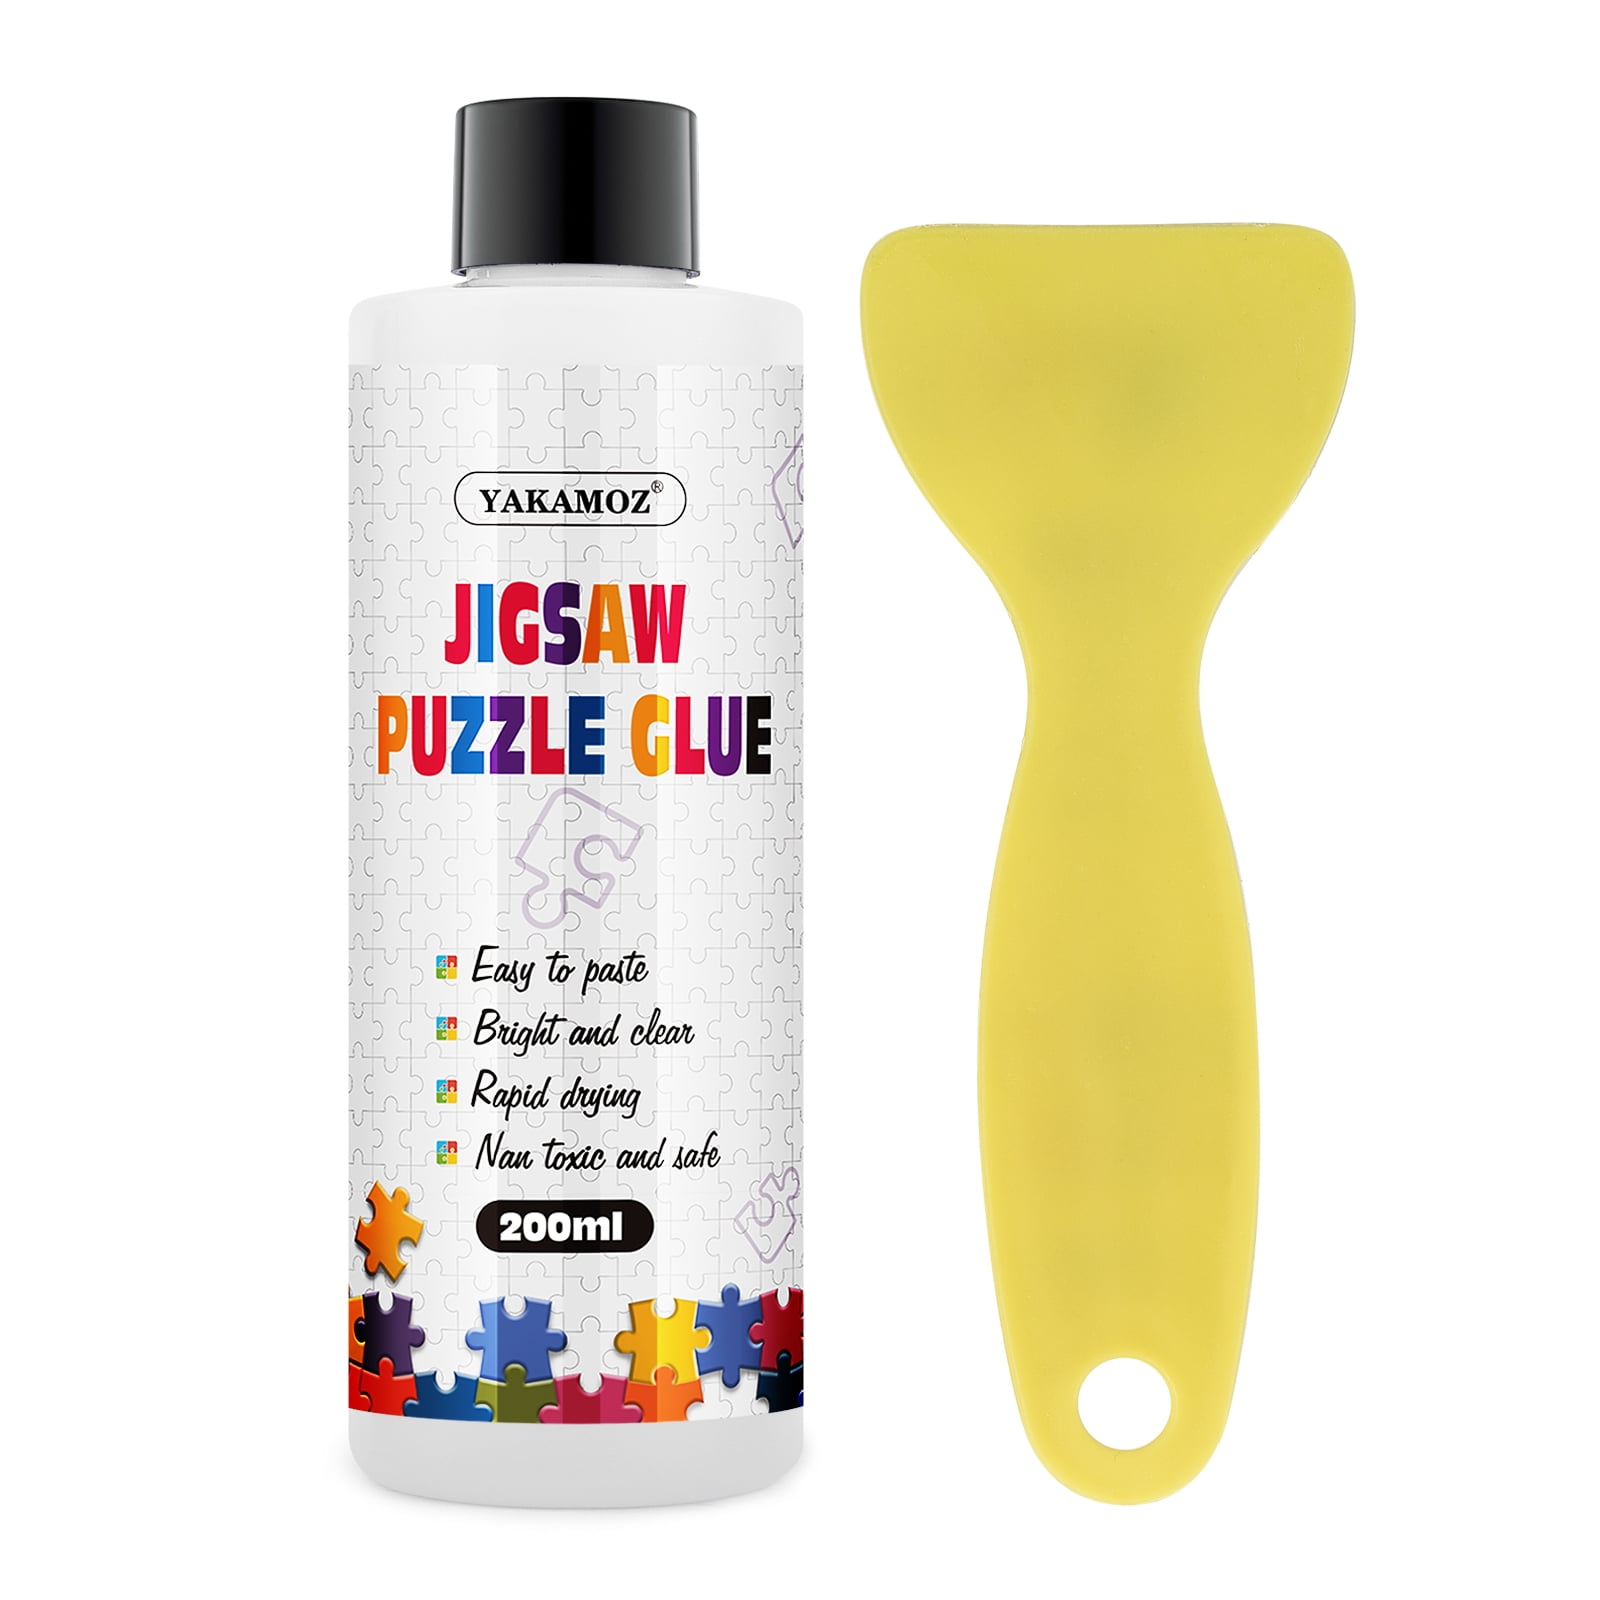 Nariolar Jigsaw Puzzle Glue Clear with Applicator Suitable for Fixing and  Hanging Puzzles, Quick Drying, 4 Ounces